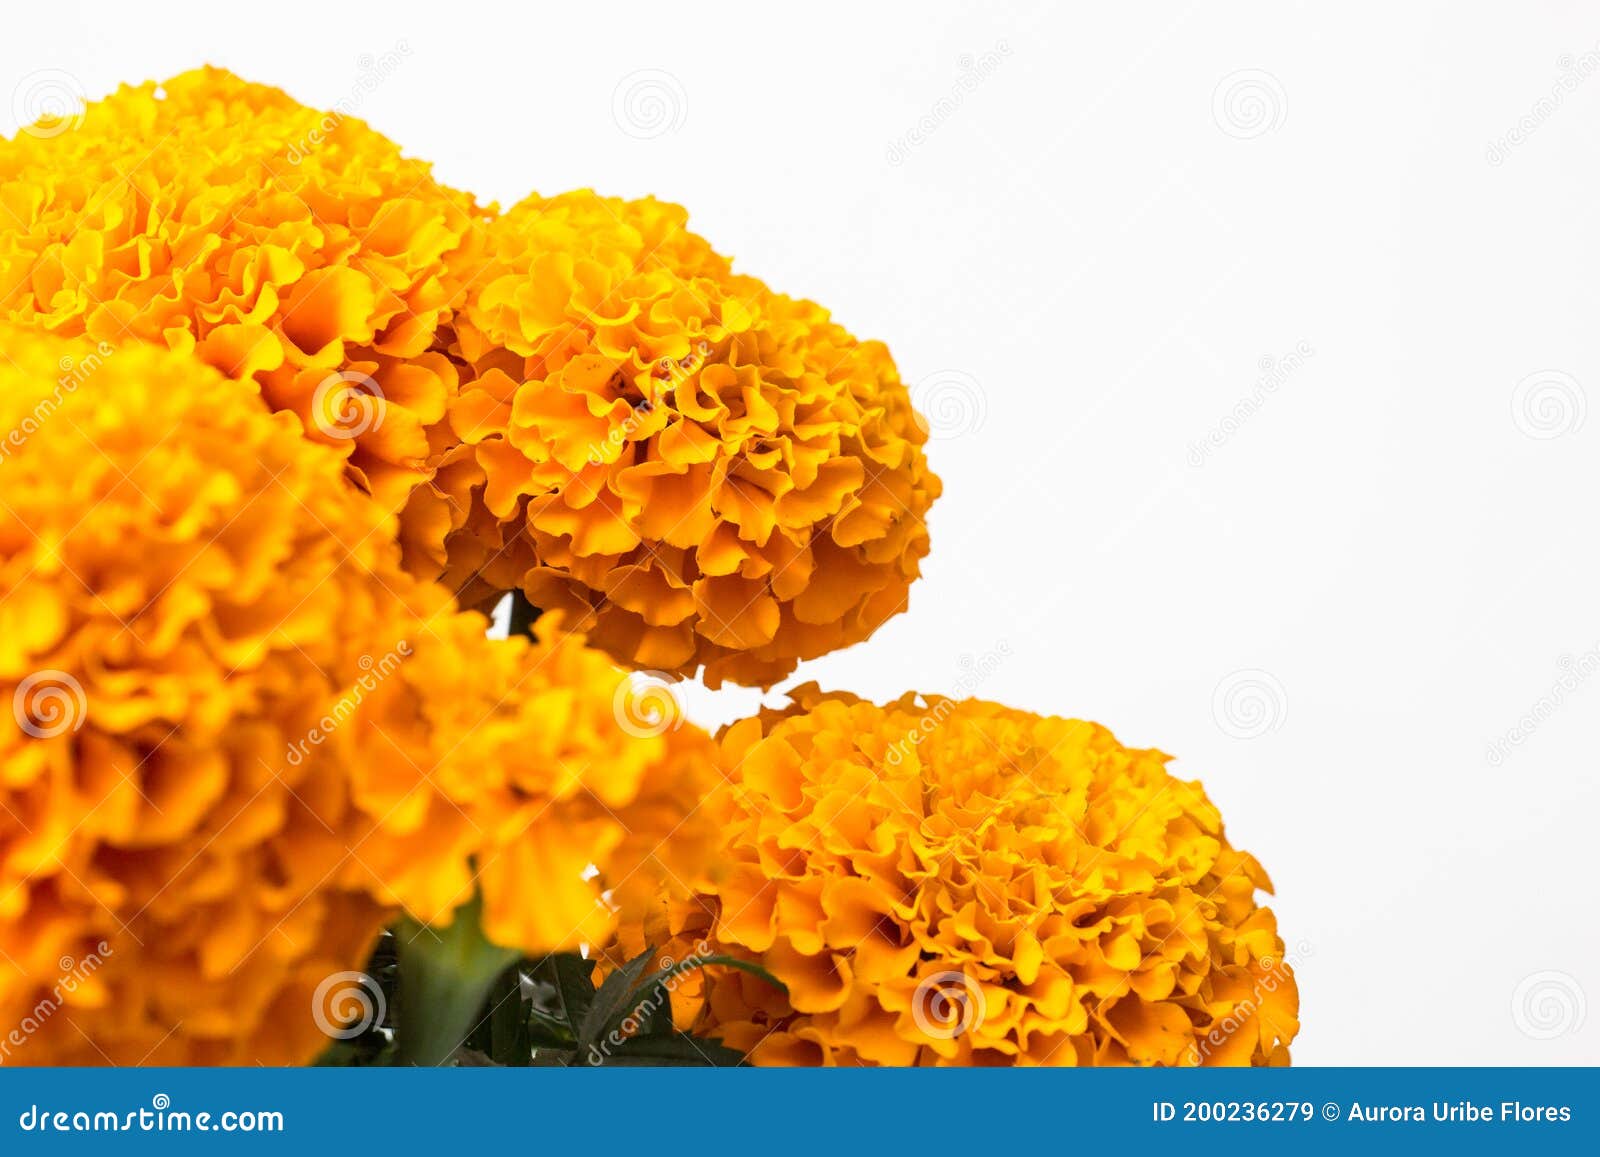 Day of the Dead Cempasuchil Flowers Stock Image - Image of symbol, mexican:  200236279